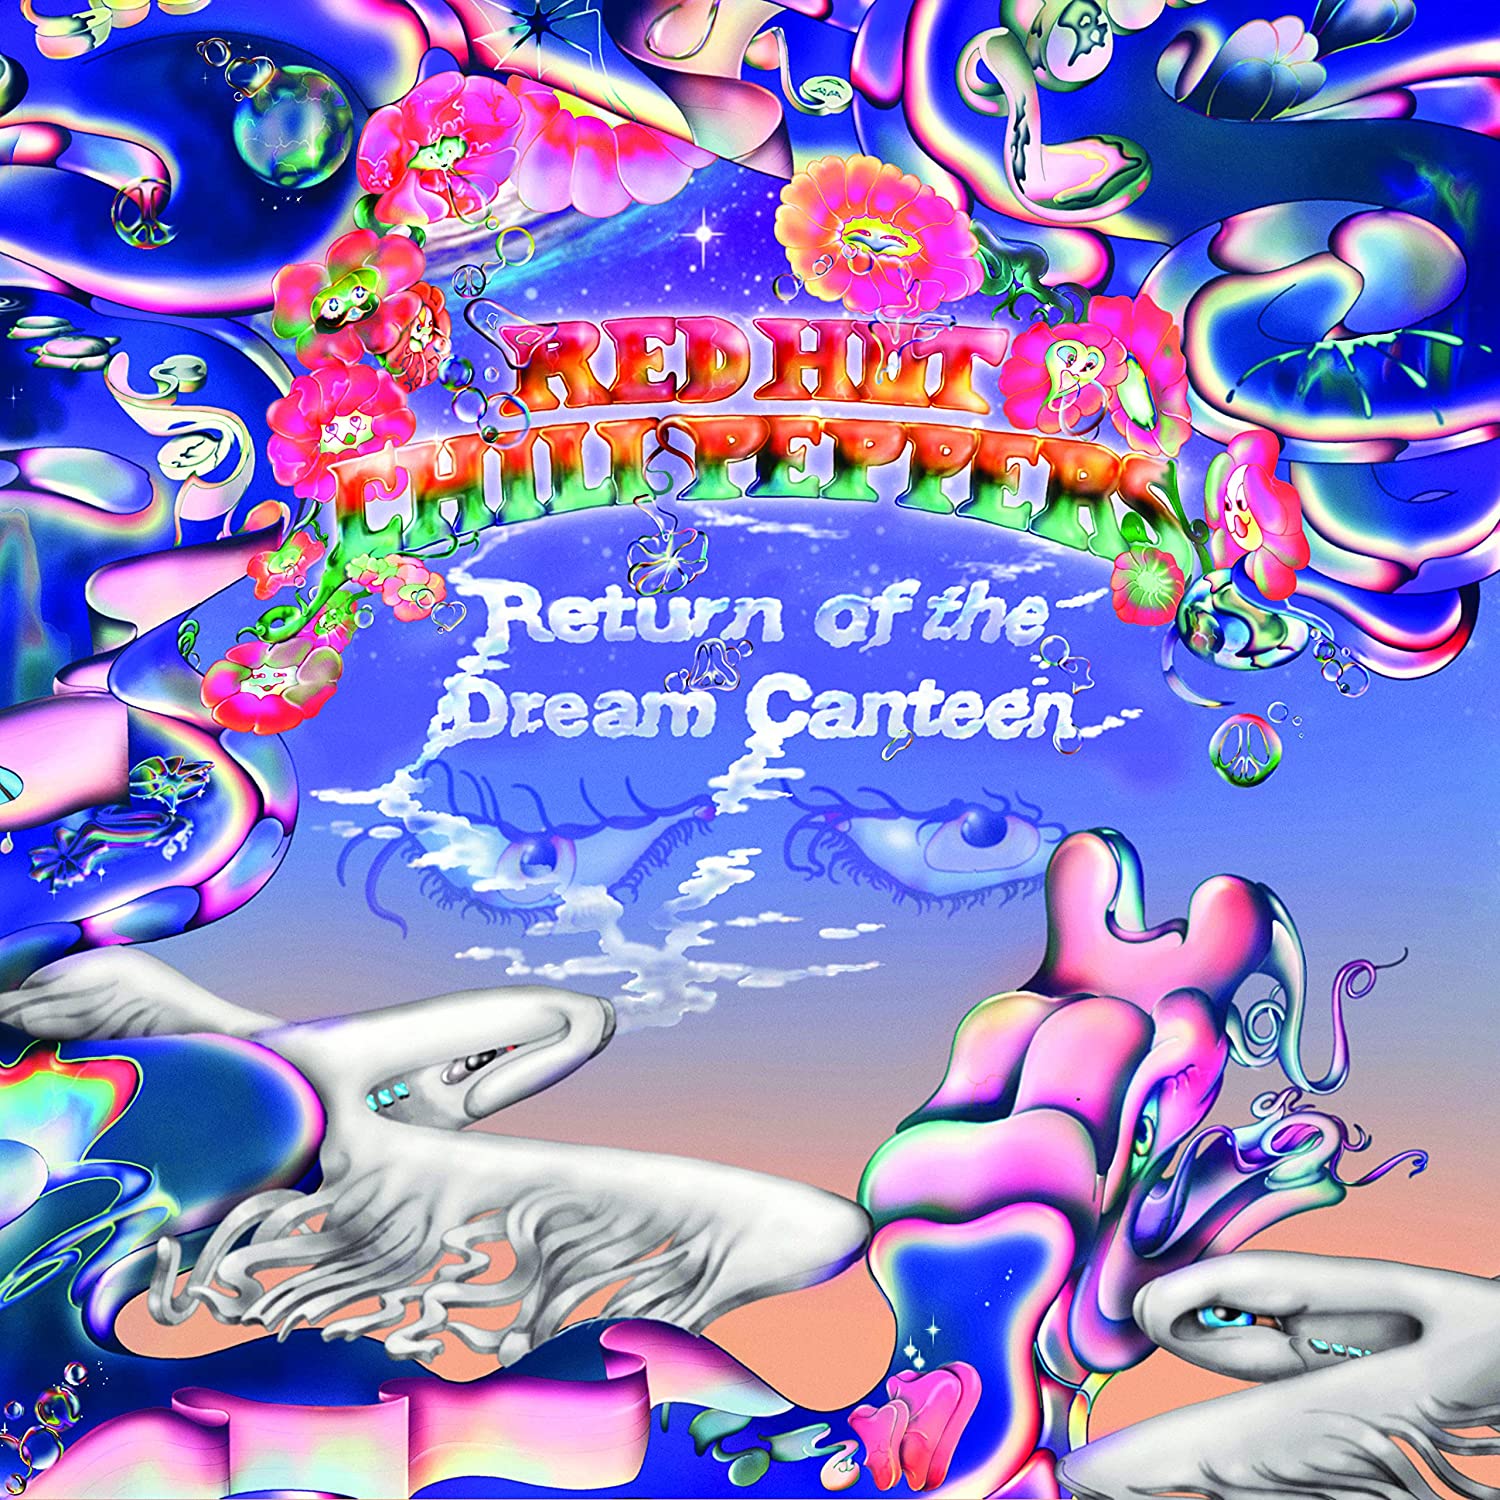 Ram Jams: The Red Chili Peppers Get High on Sound in of Dream Canteen' - The Observer